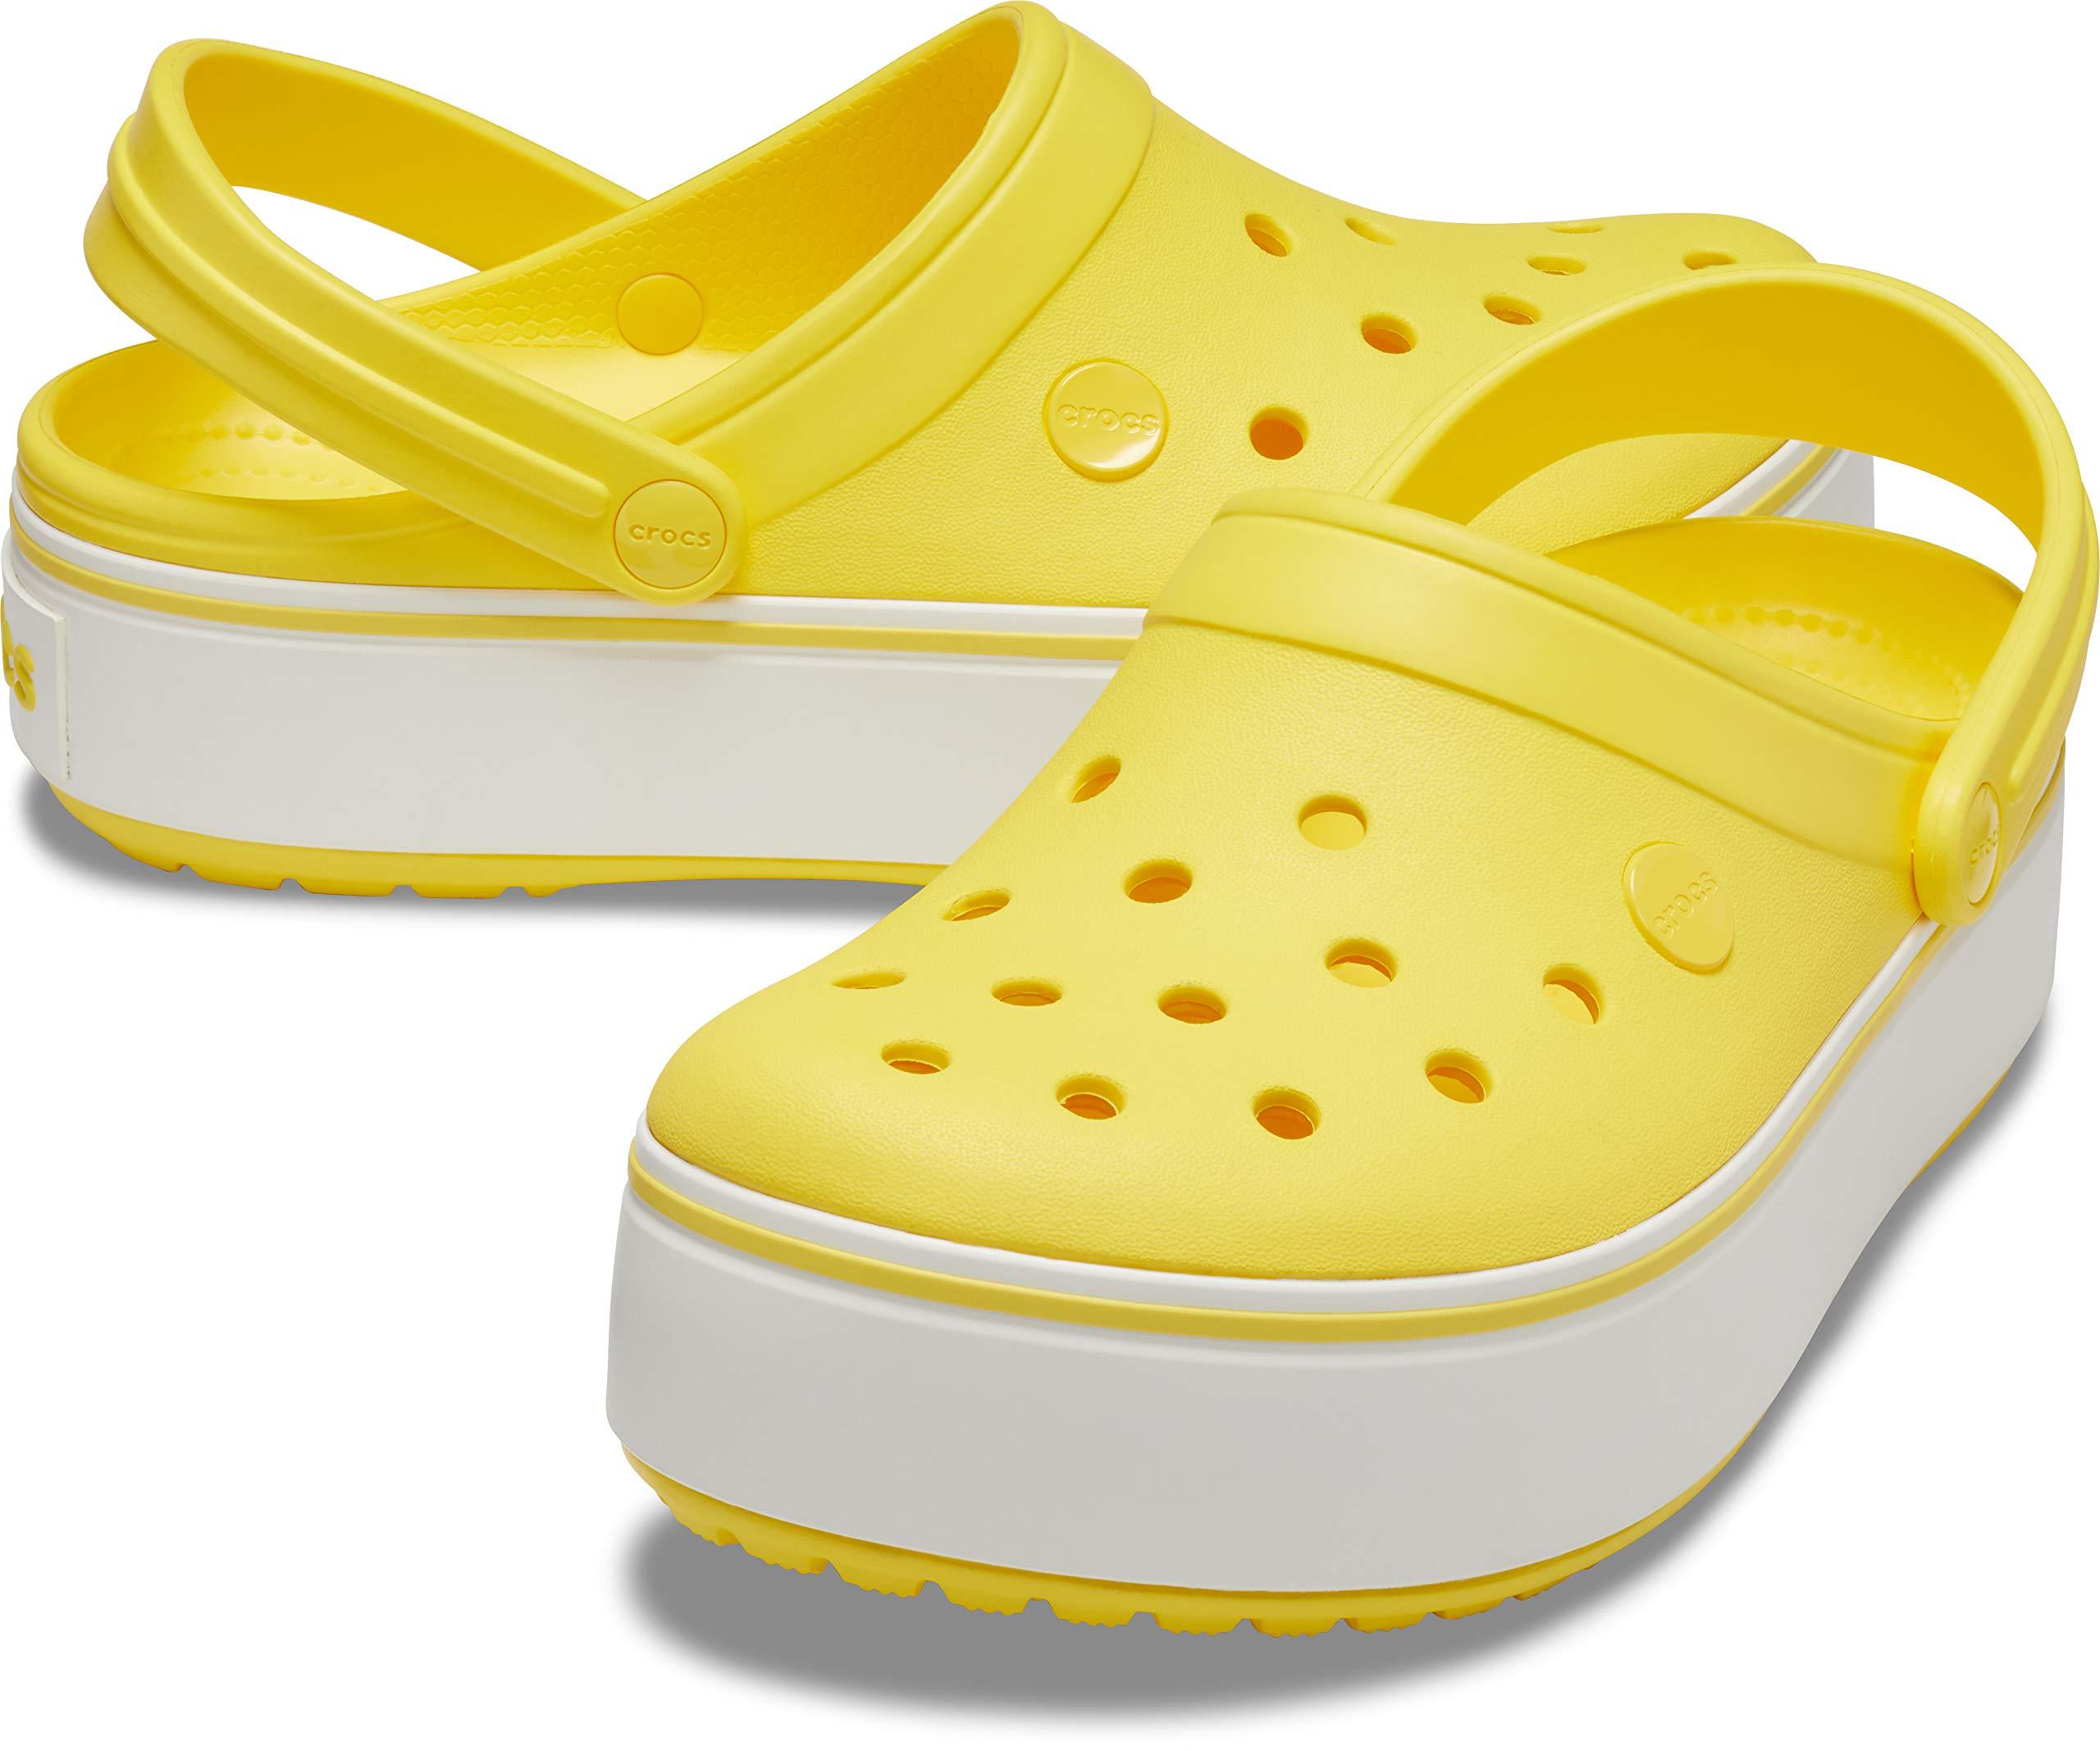 Crocs™ And Crocband Clog | Platform Shoes in Yellow | Lyst